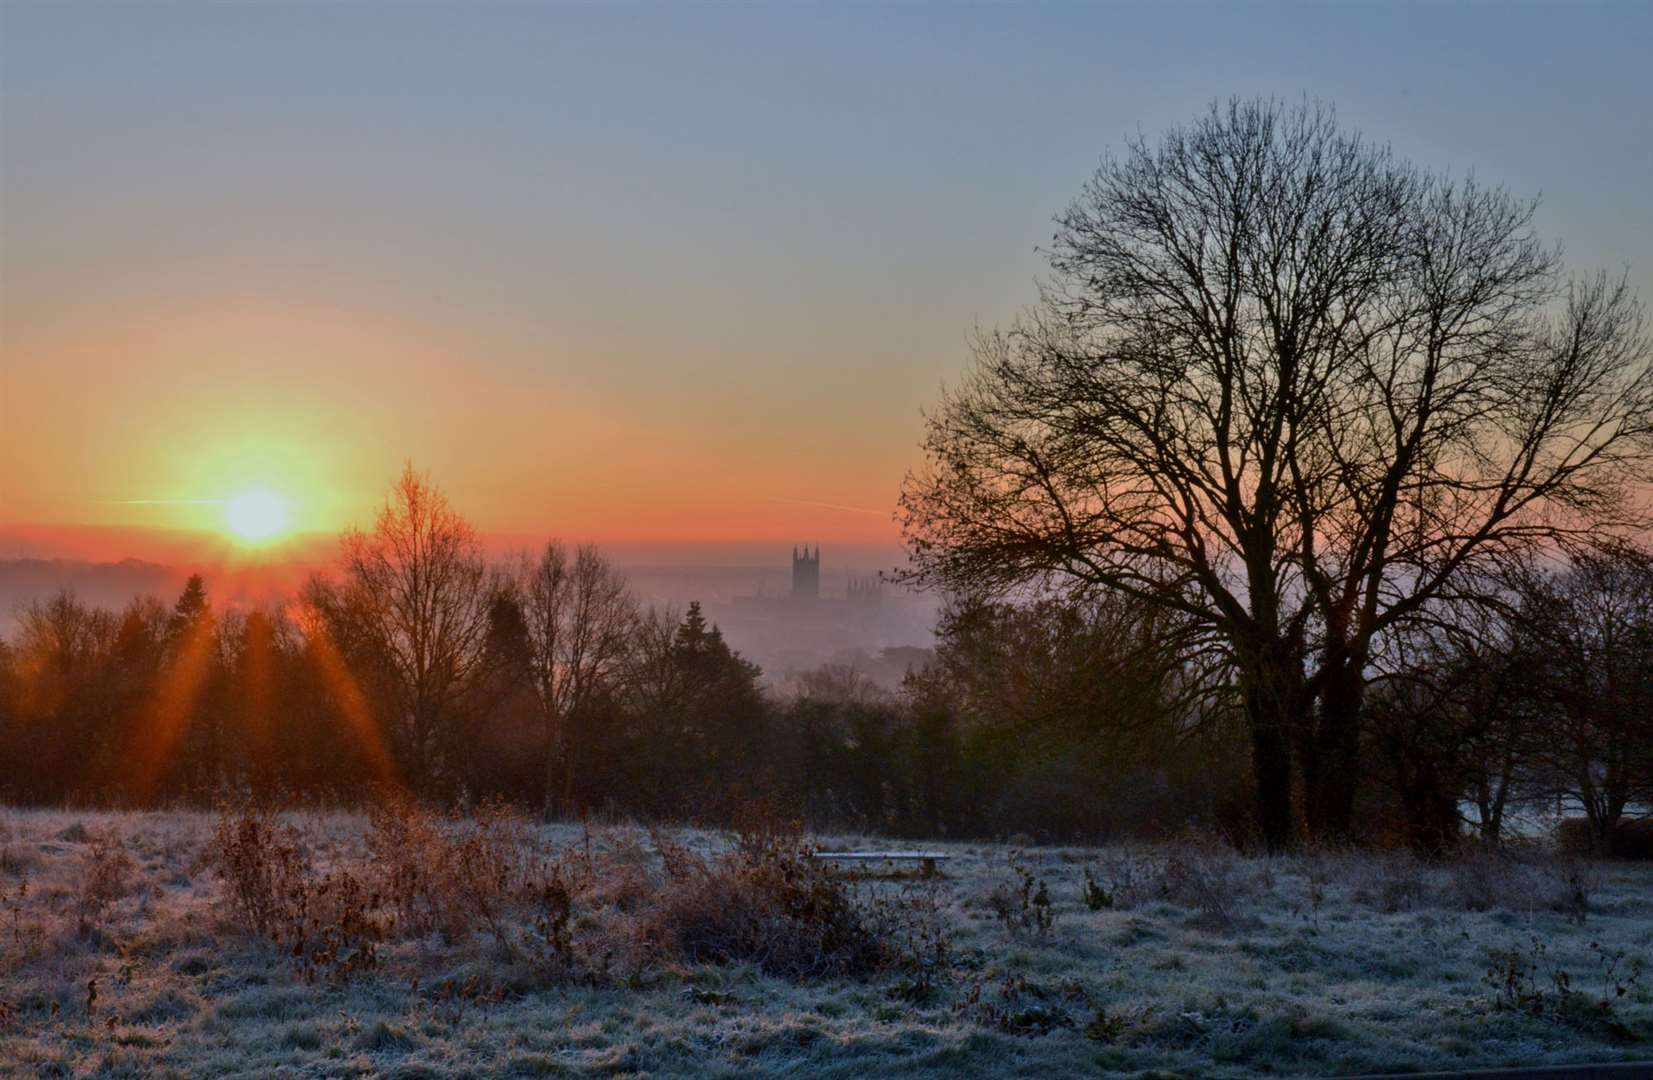 The last sunrise of 2014 - overlooking Canterbury. Picture: Martyn Stone